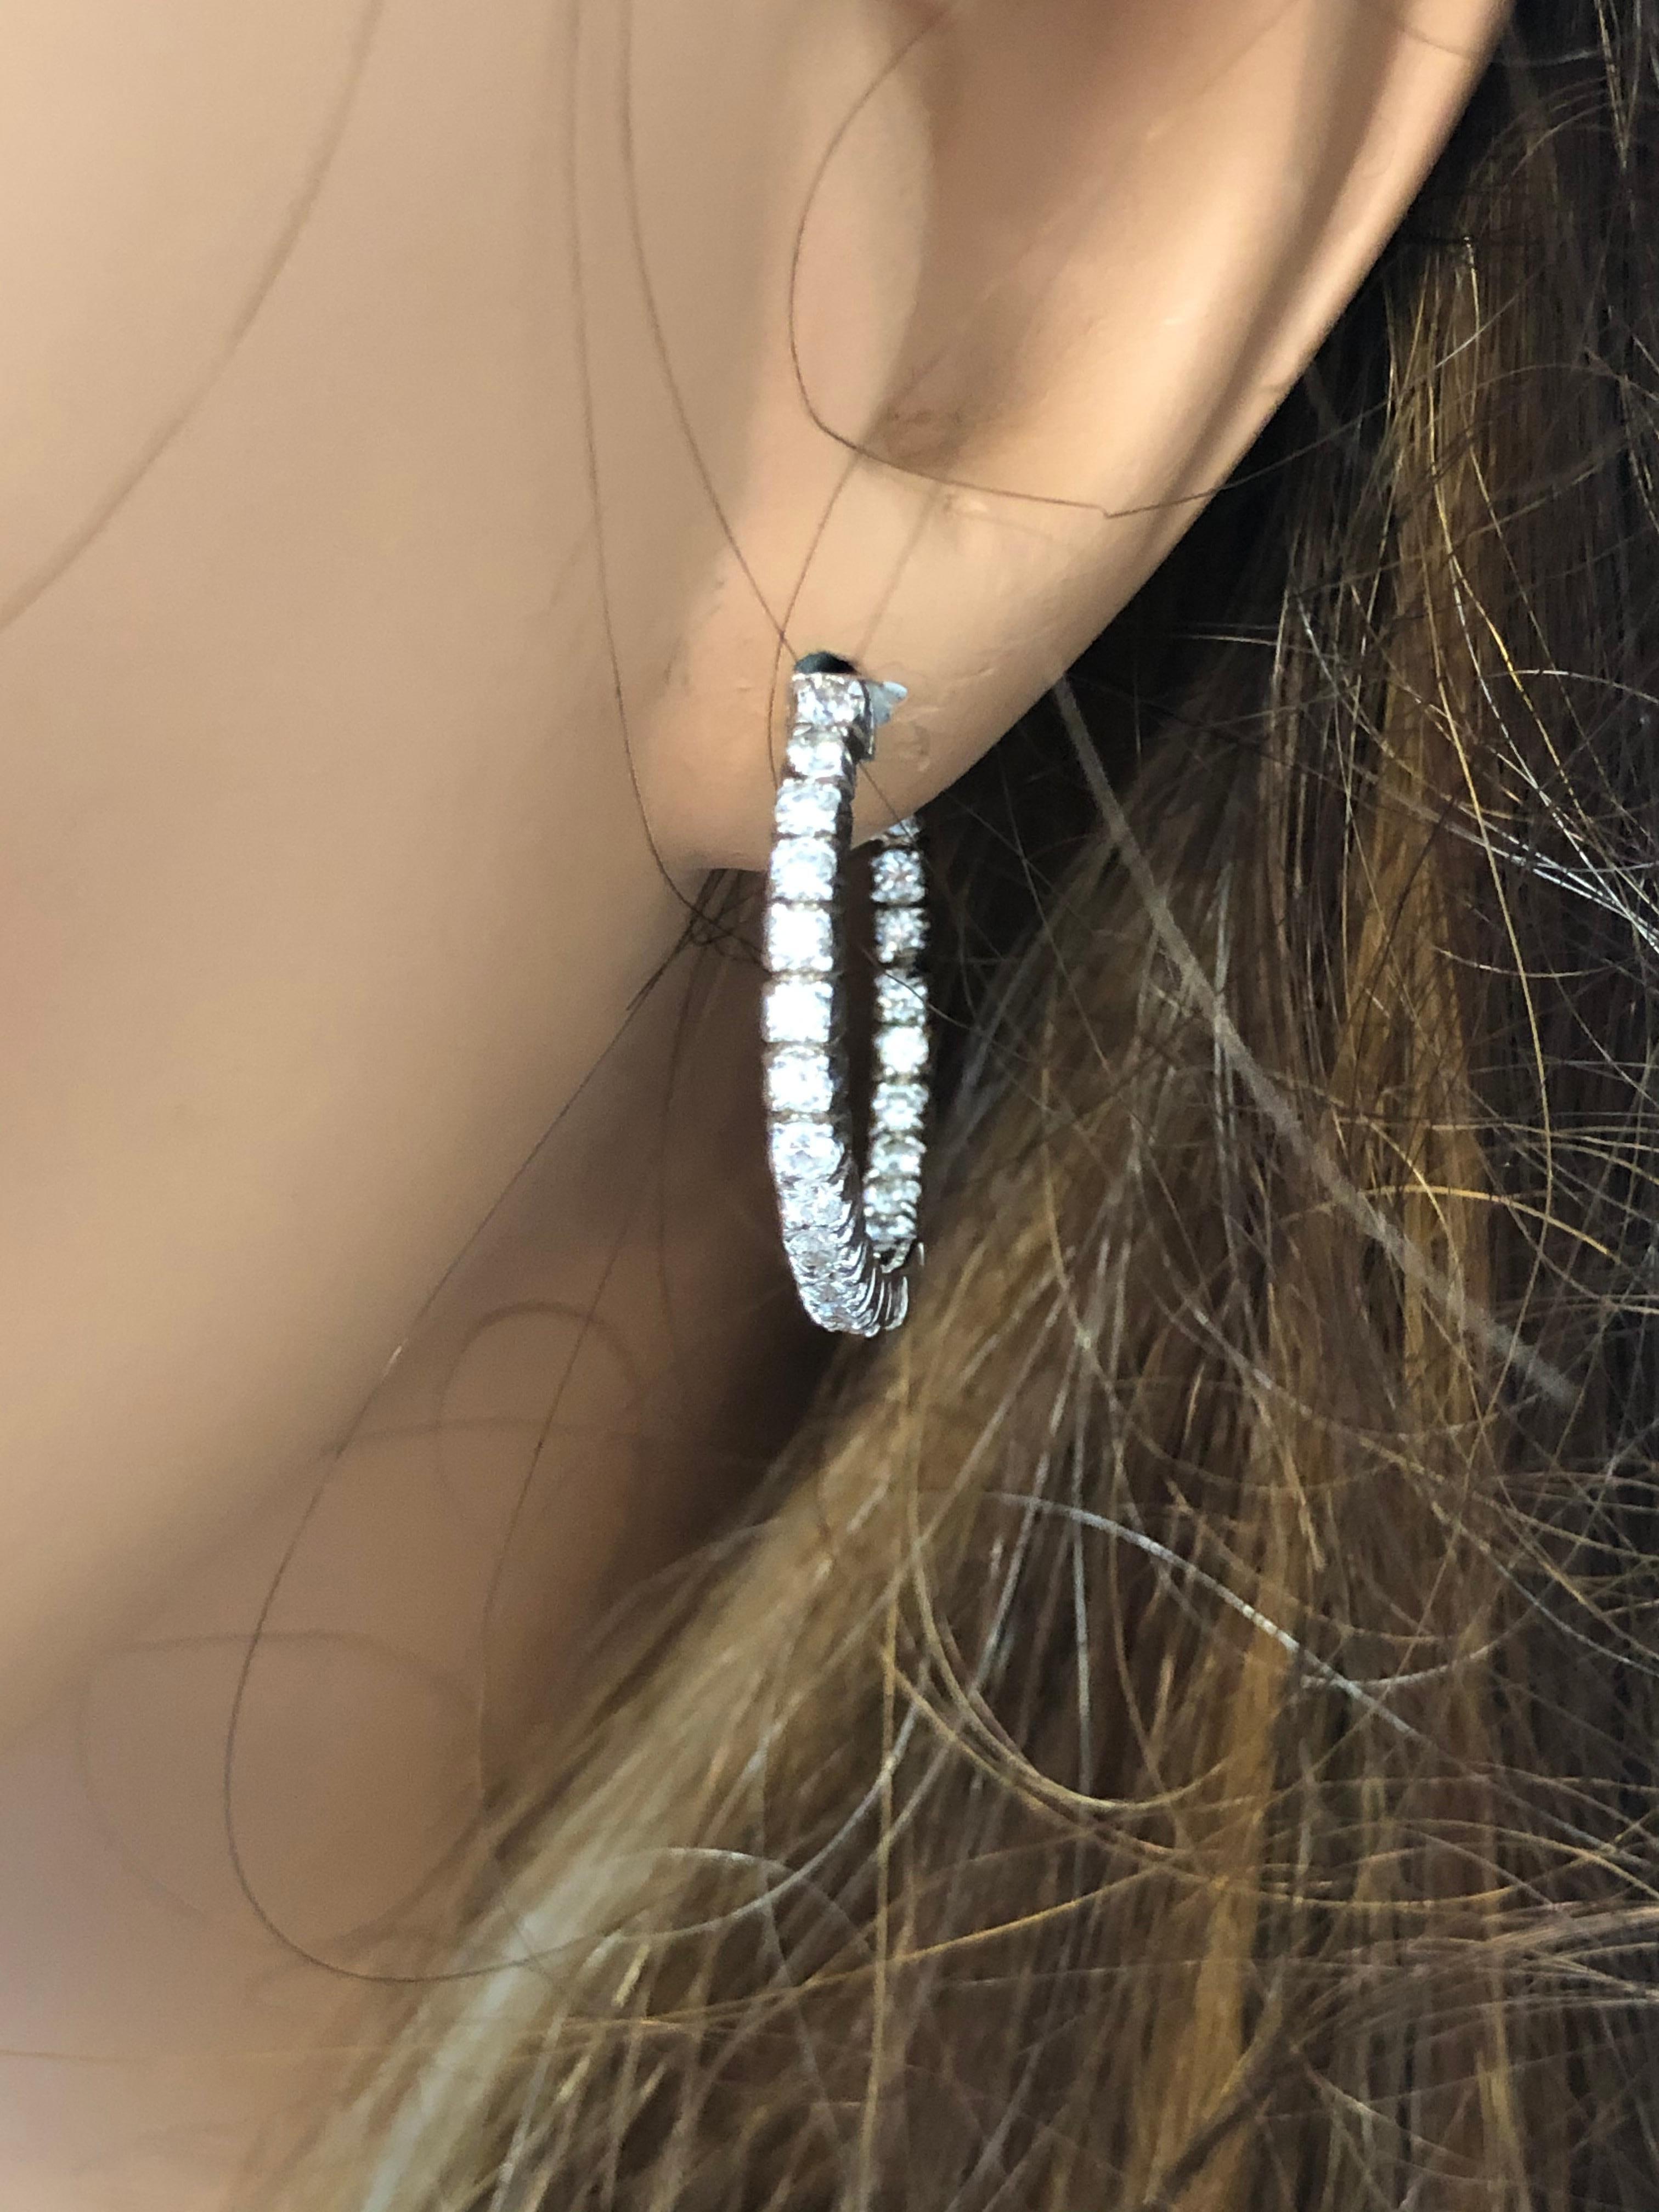 Designed in brightly polished 14 karat white gold, this gorgeous pair of inside out hoop earrings are the perfect fine jewelry accessory to treasure for a lifetime. These spectacular hoops feature 48 sparkling round brilliant cut diamonds prong set